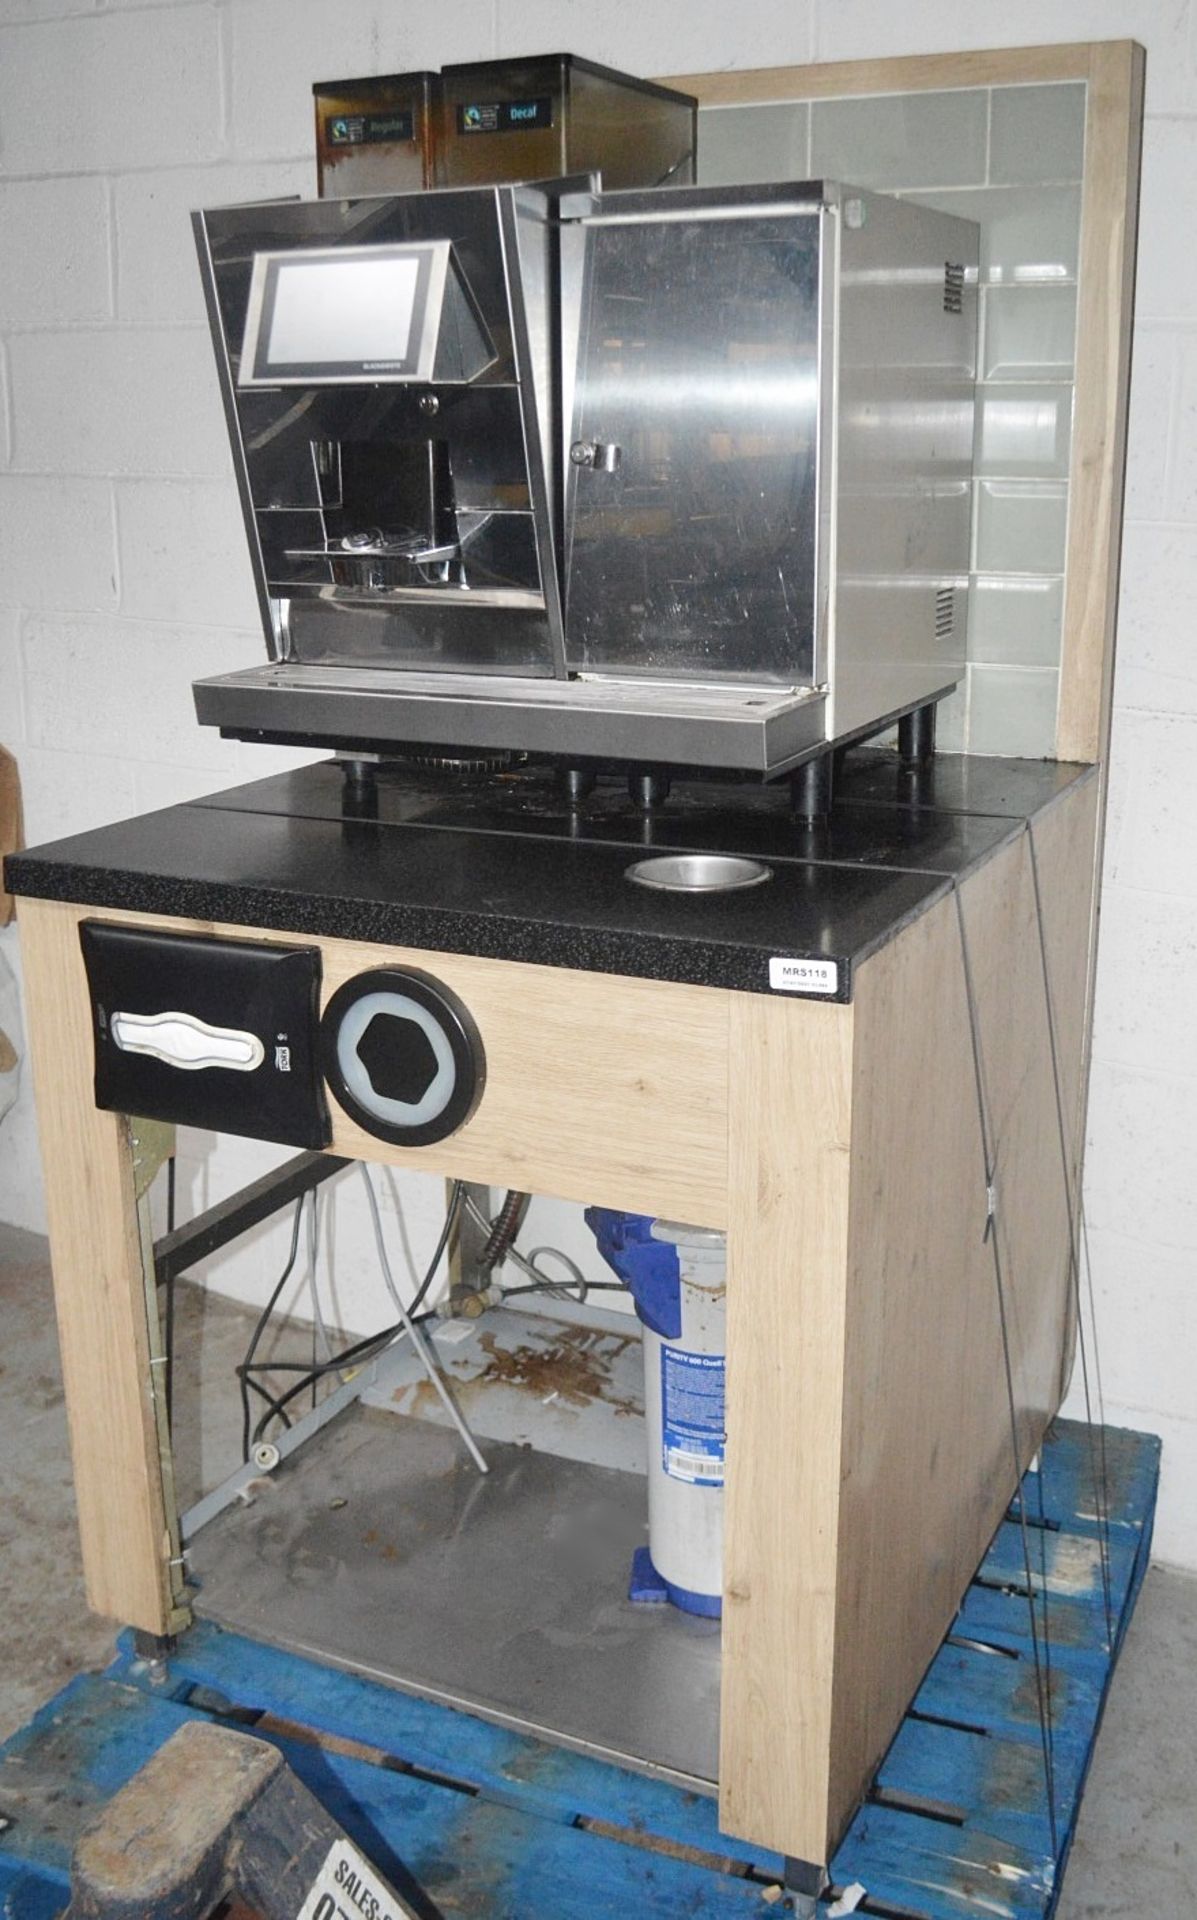 1 x Thermoplan 'Black & White 3' Bean To Cup Coffee Machine + Milk Fridge Mounted On Station With